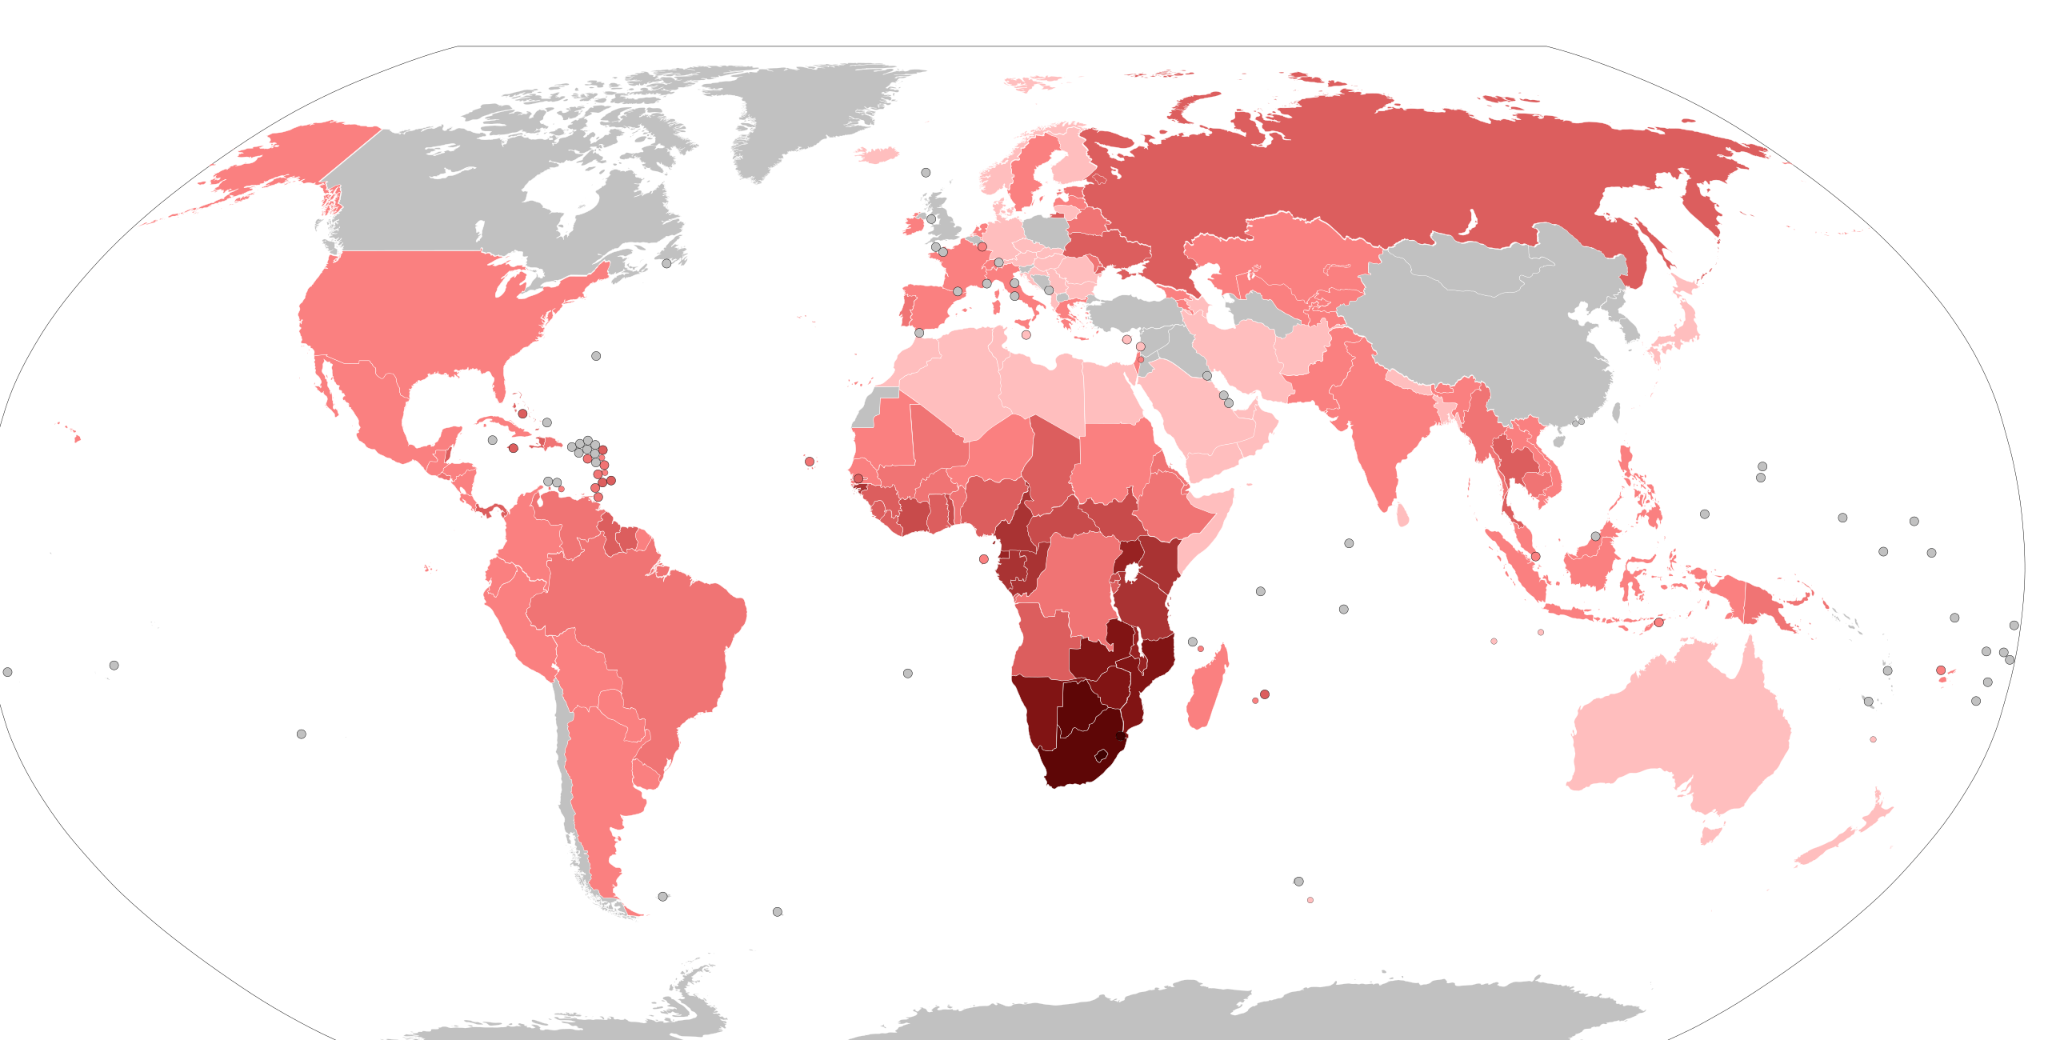 World map with different HIV infection rates throughout the world.